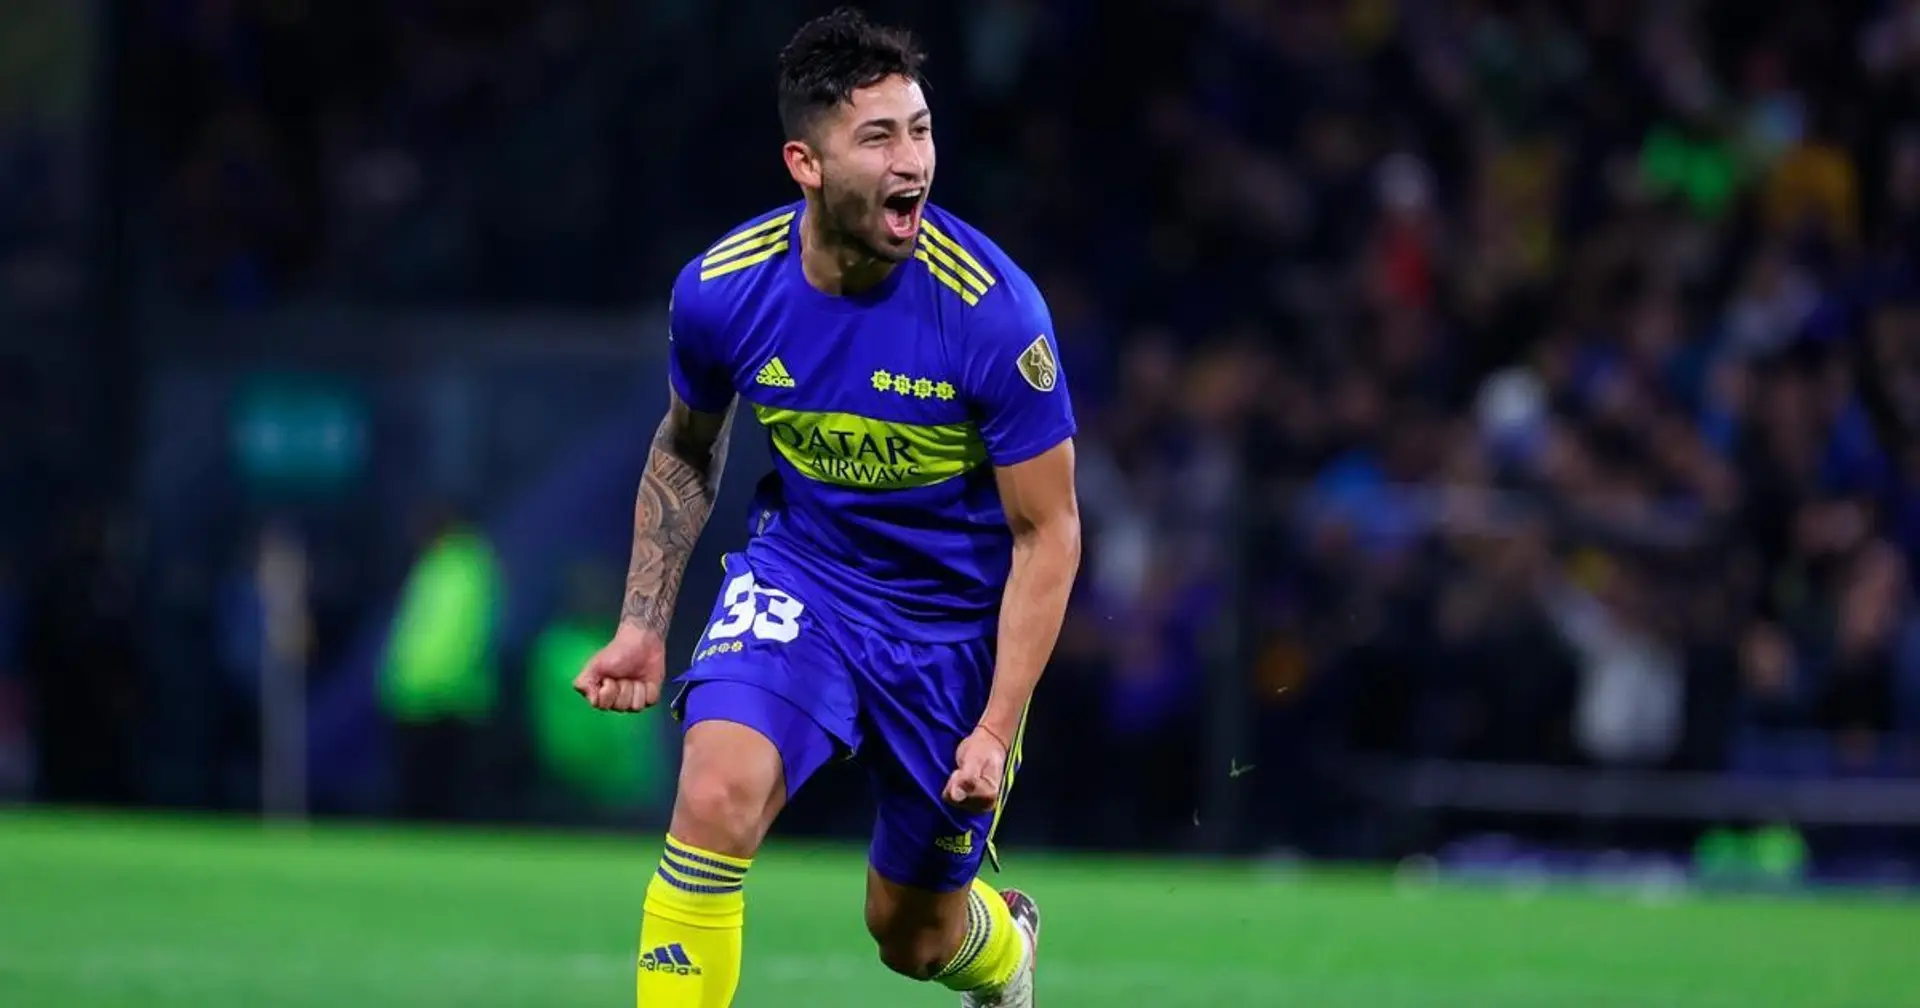 Liverpool eyeing Boca Juniors star with release clause of £10 million (reliability: 3 stars)